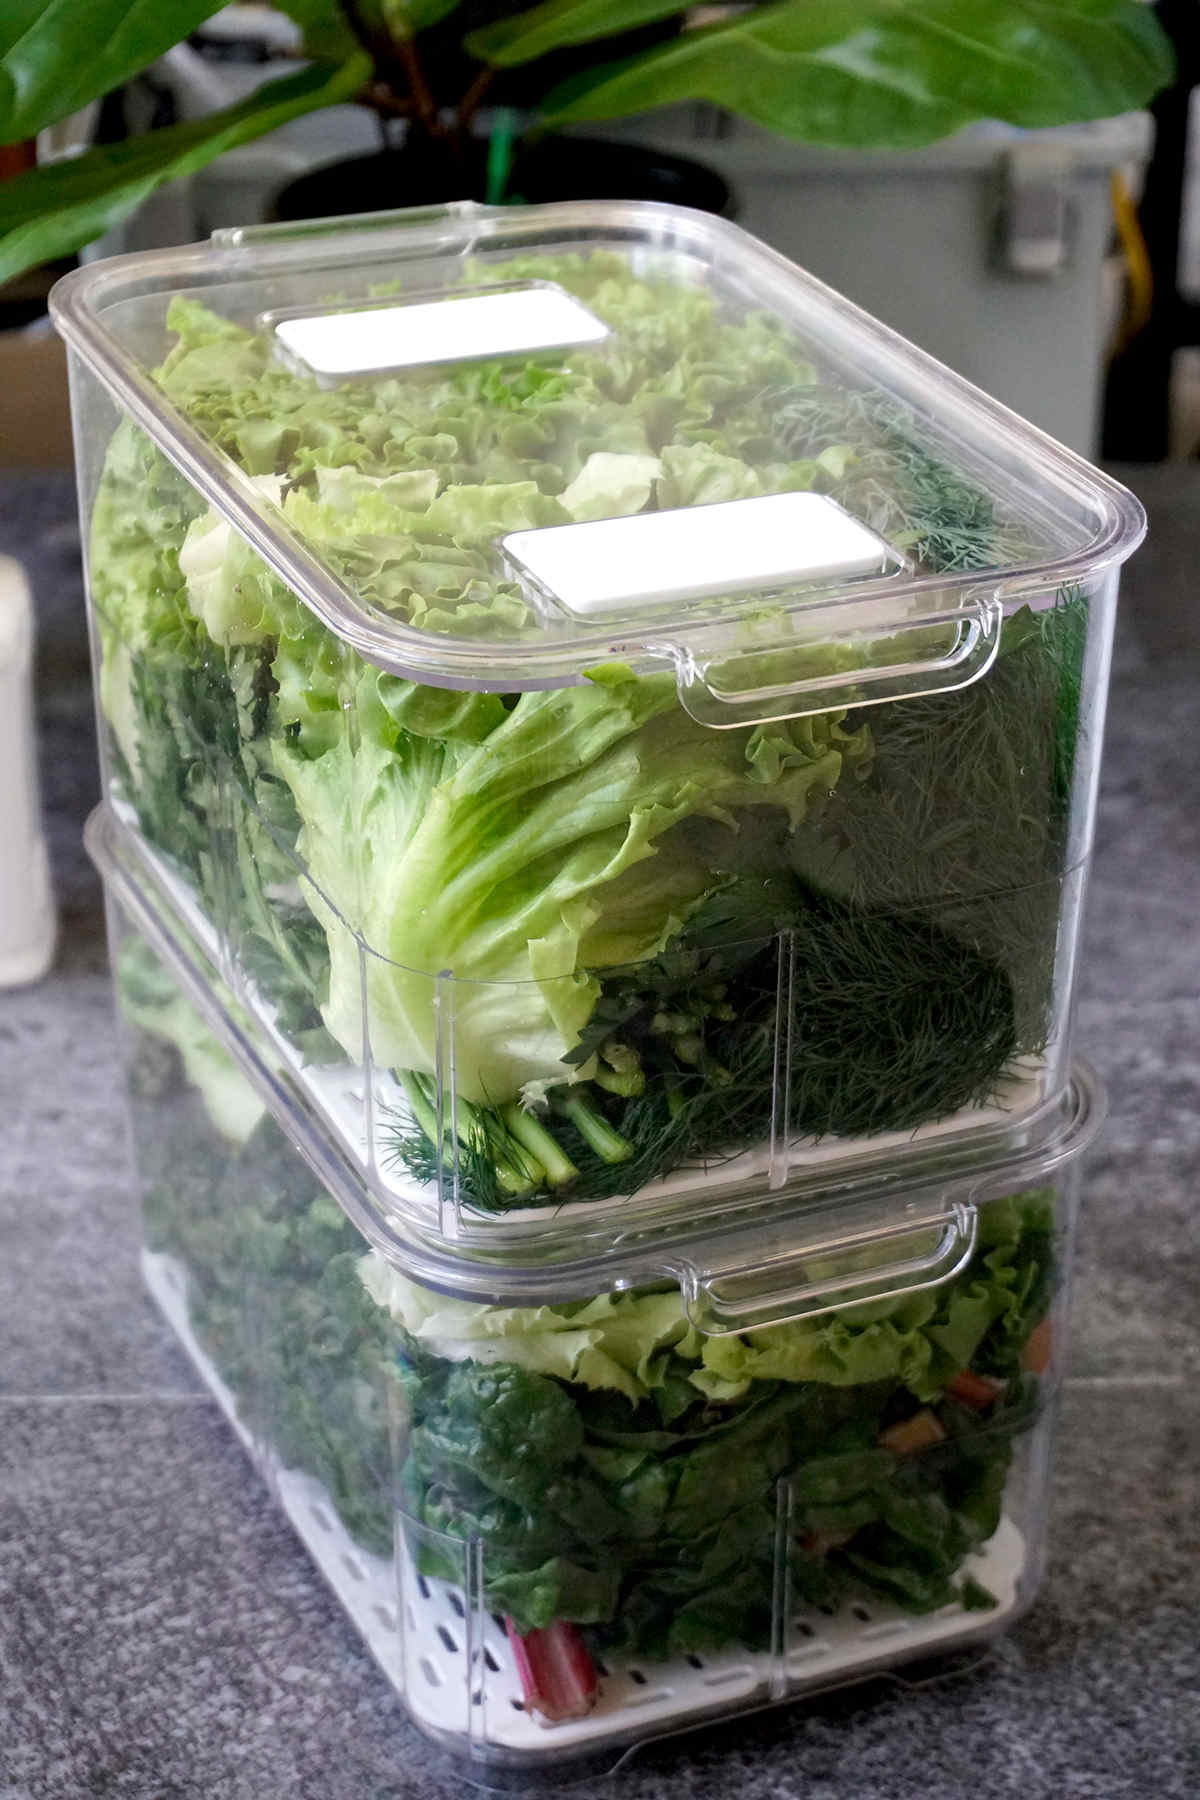 Storing leafy green vegetables for meal prep in containers.